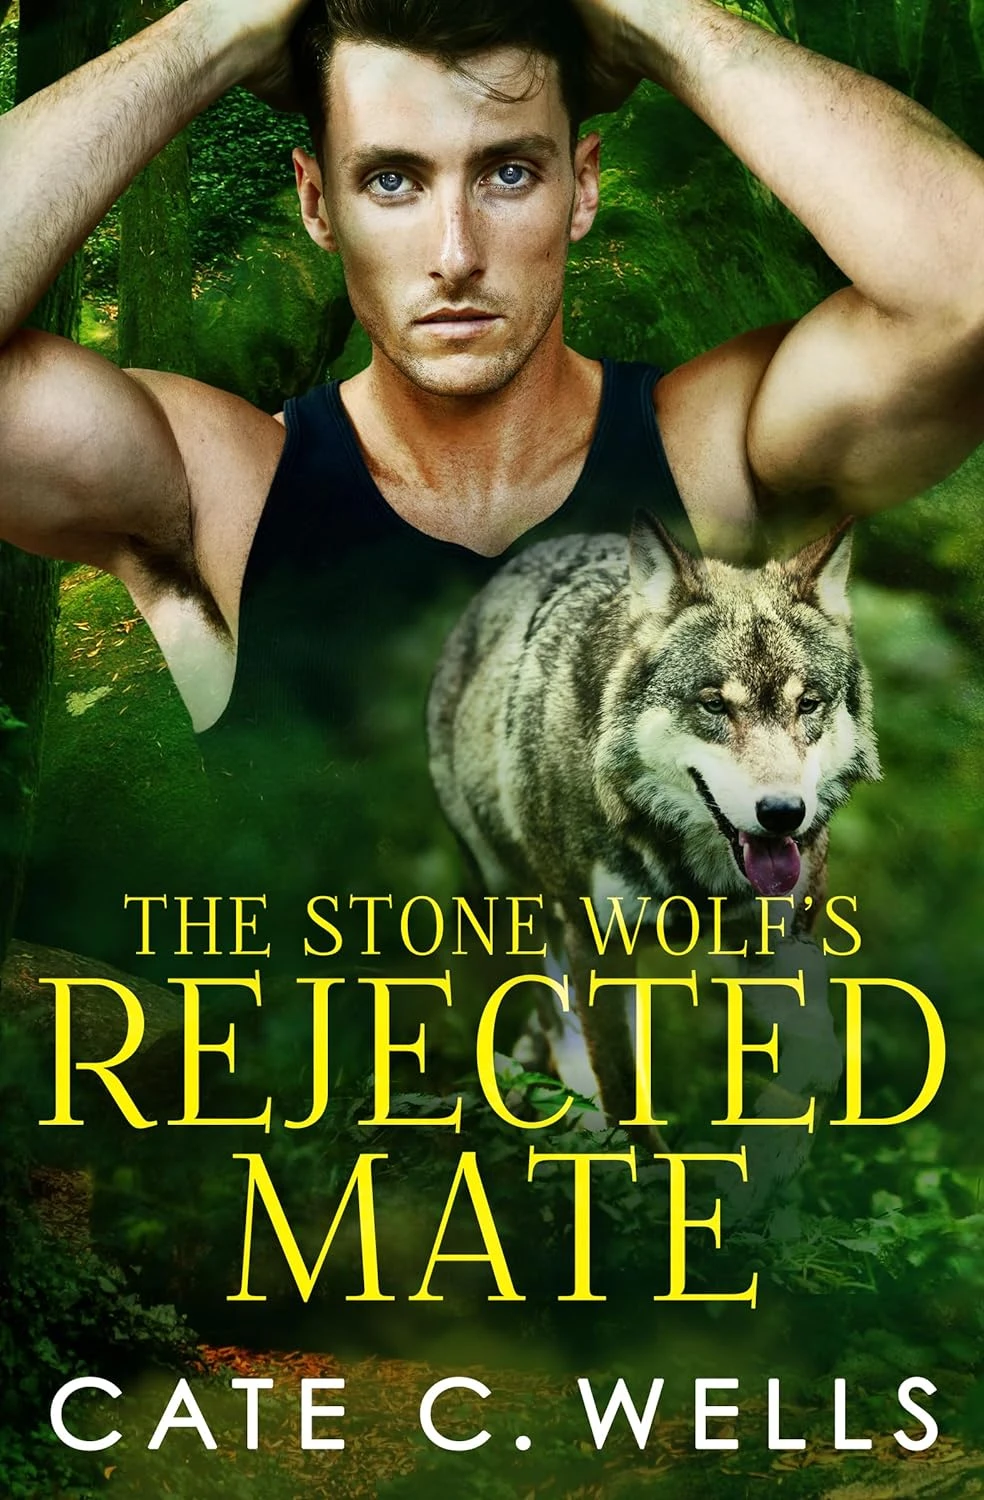 The Stone Wolf’s Rejected Mate